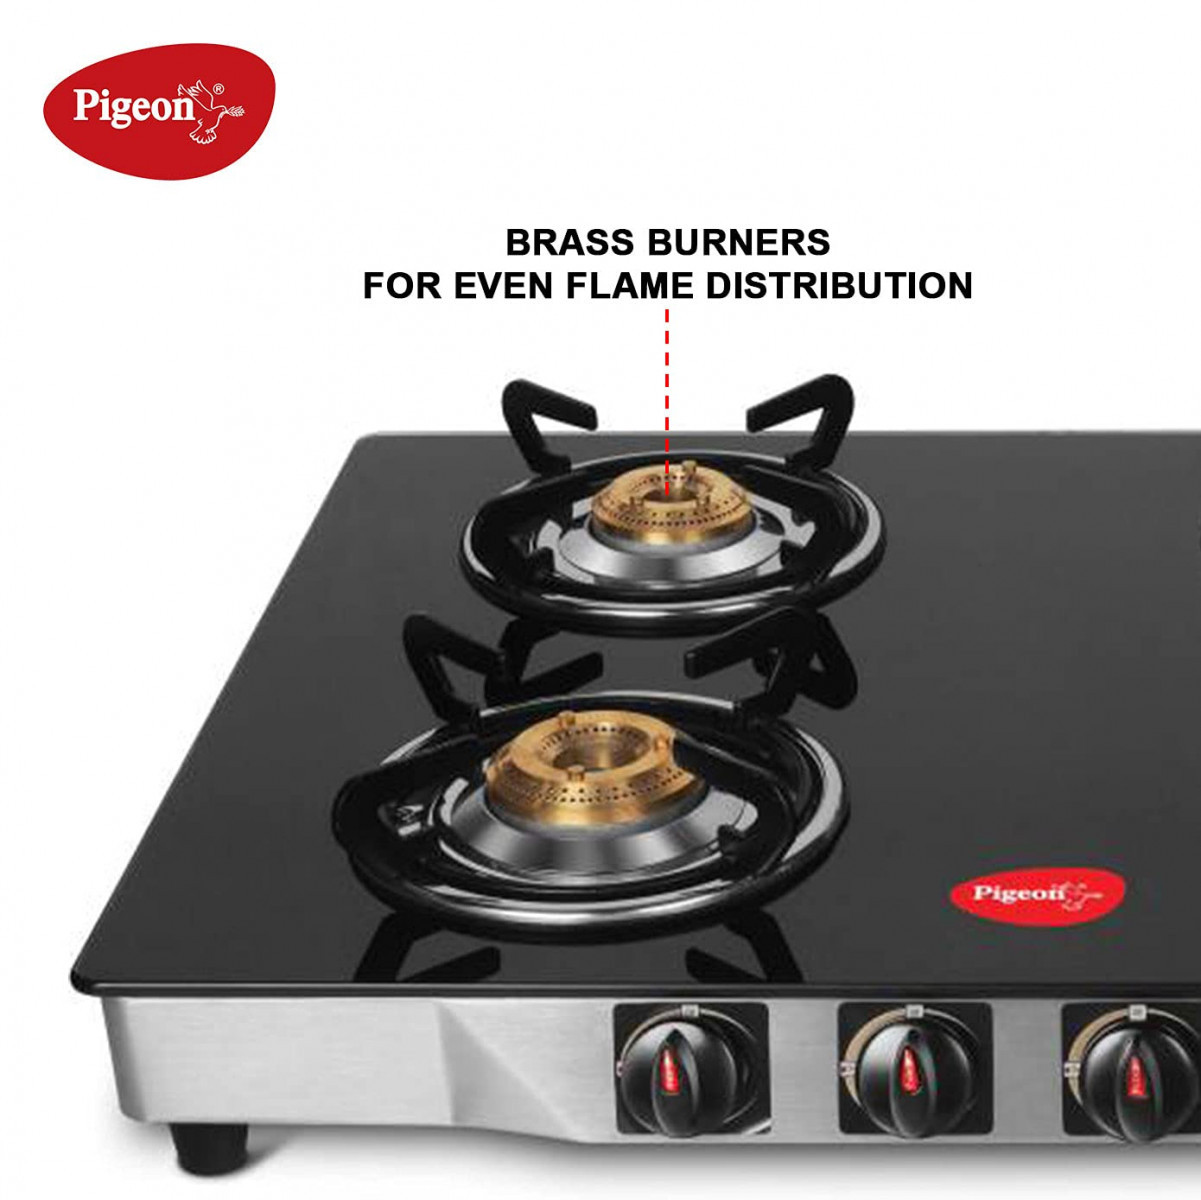 Pigeon by Stovekraft Blaze Gas Stove with High Powered 4 Brass Burner Glass Cooktop